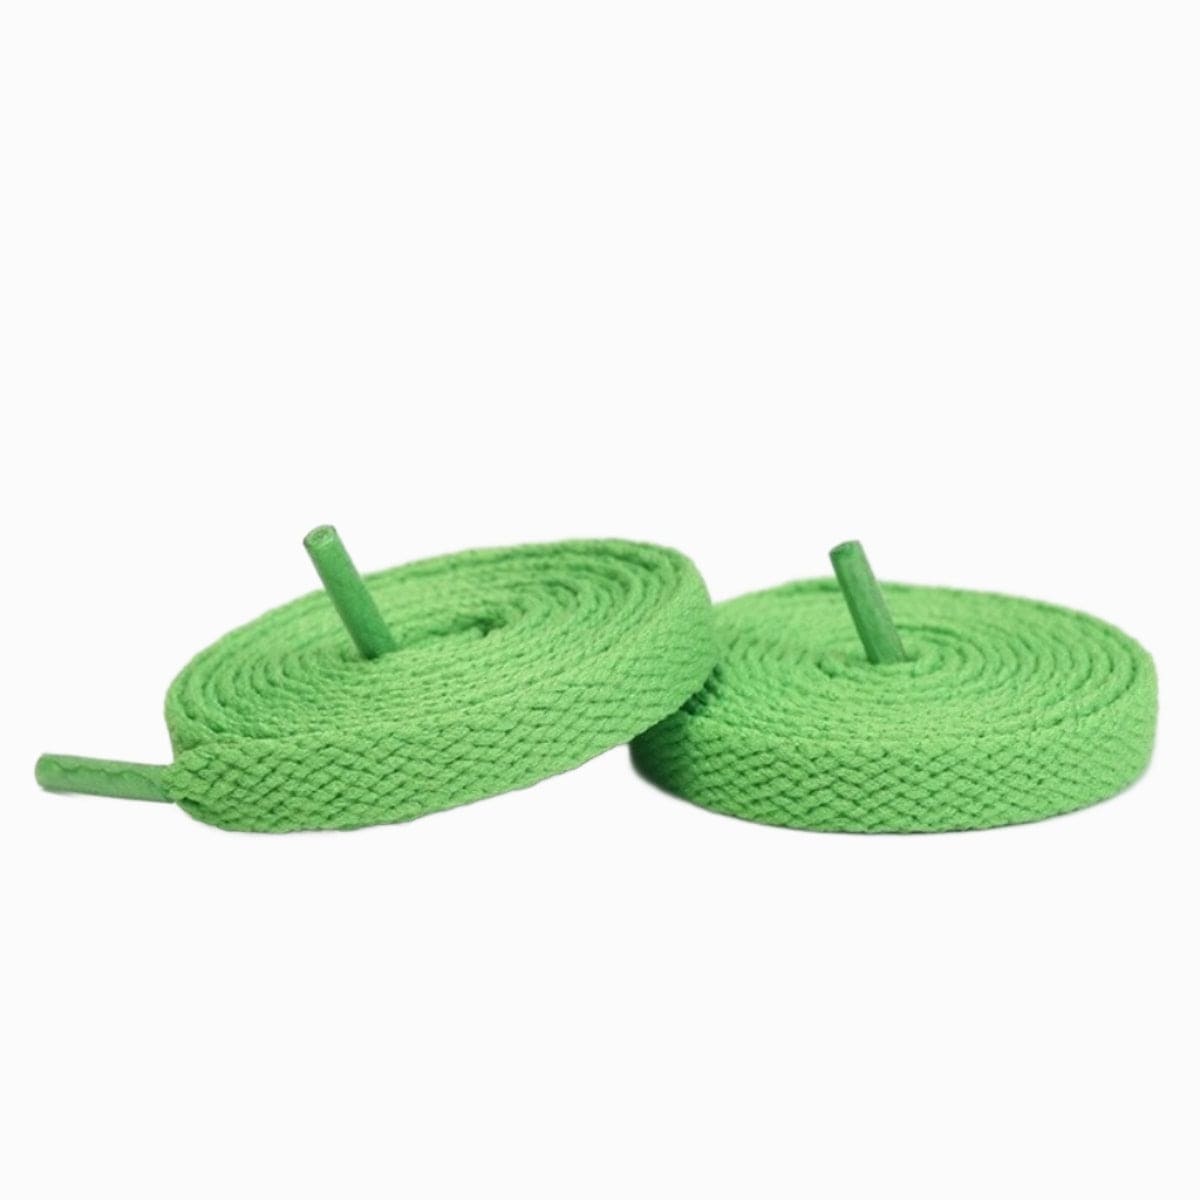 Bright Green Replacement Adidas Shoe Laces for Adidas Handball Spezial Sneakers by Kicks Shoelaces